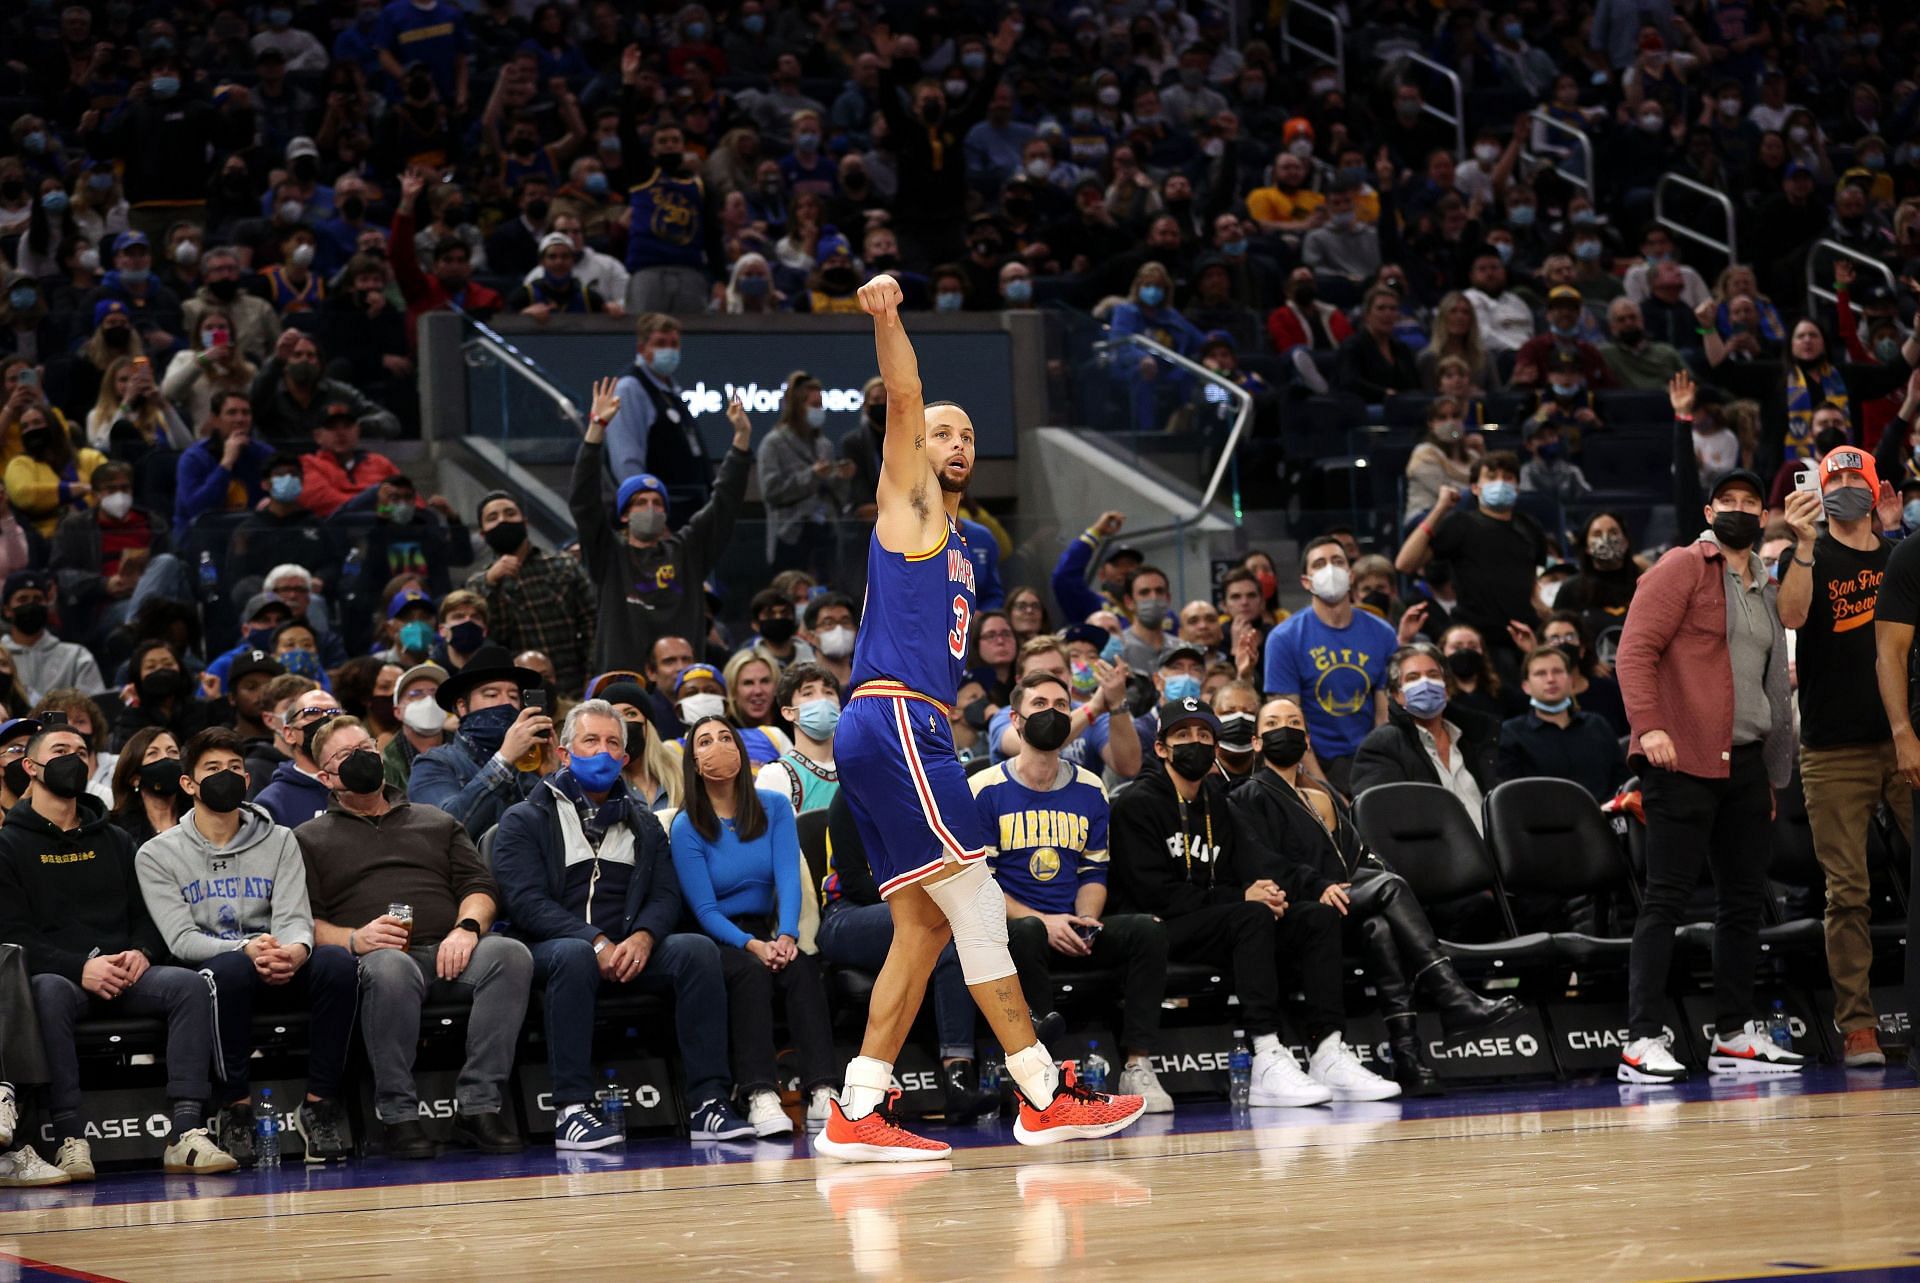 Steph Curry against the Denver Nuggets